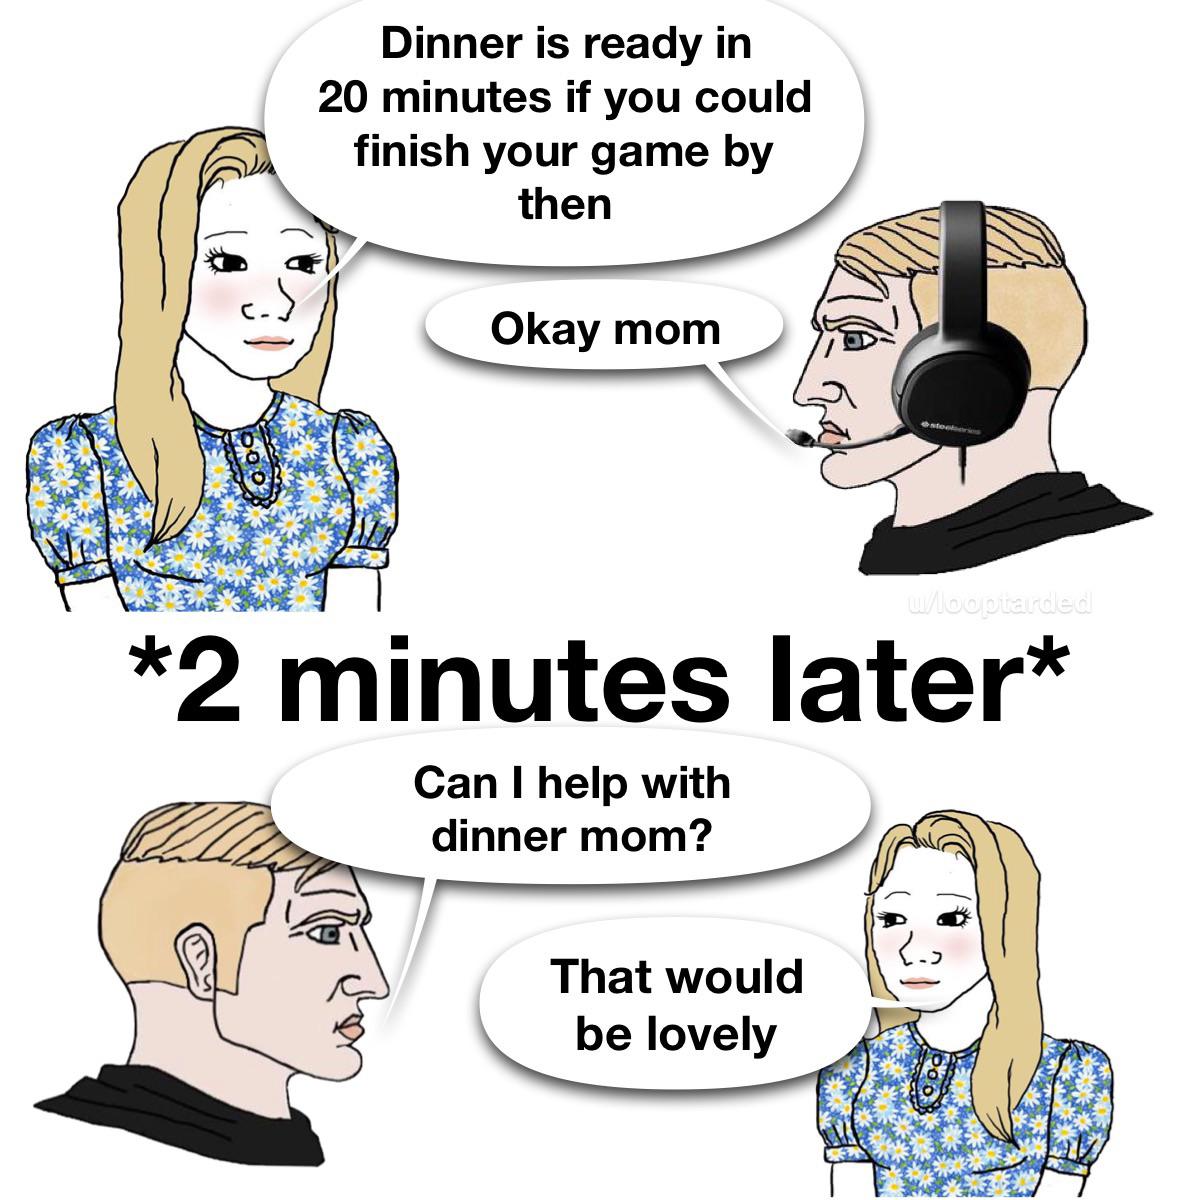 dank memes - cartoon - Dinner is ready in 20 minutes if you could finish your game by then Okay mom stoelorios wlooptarded 2 minutes later Can I help with dinner mom? That would be lovely